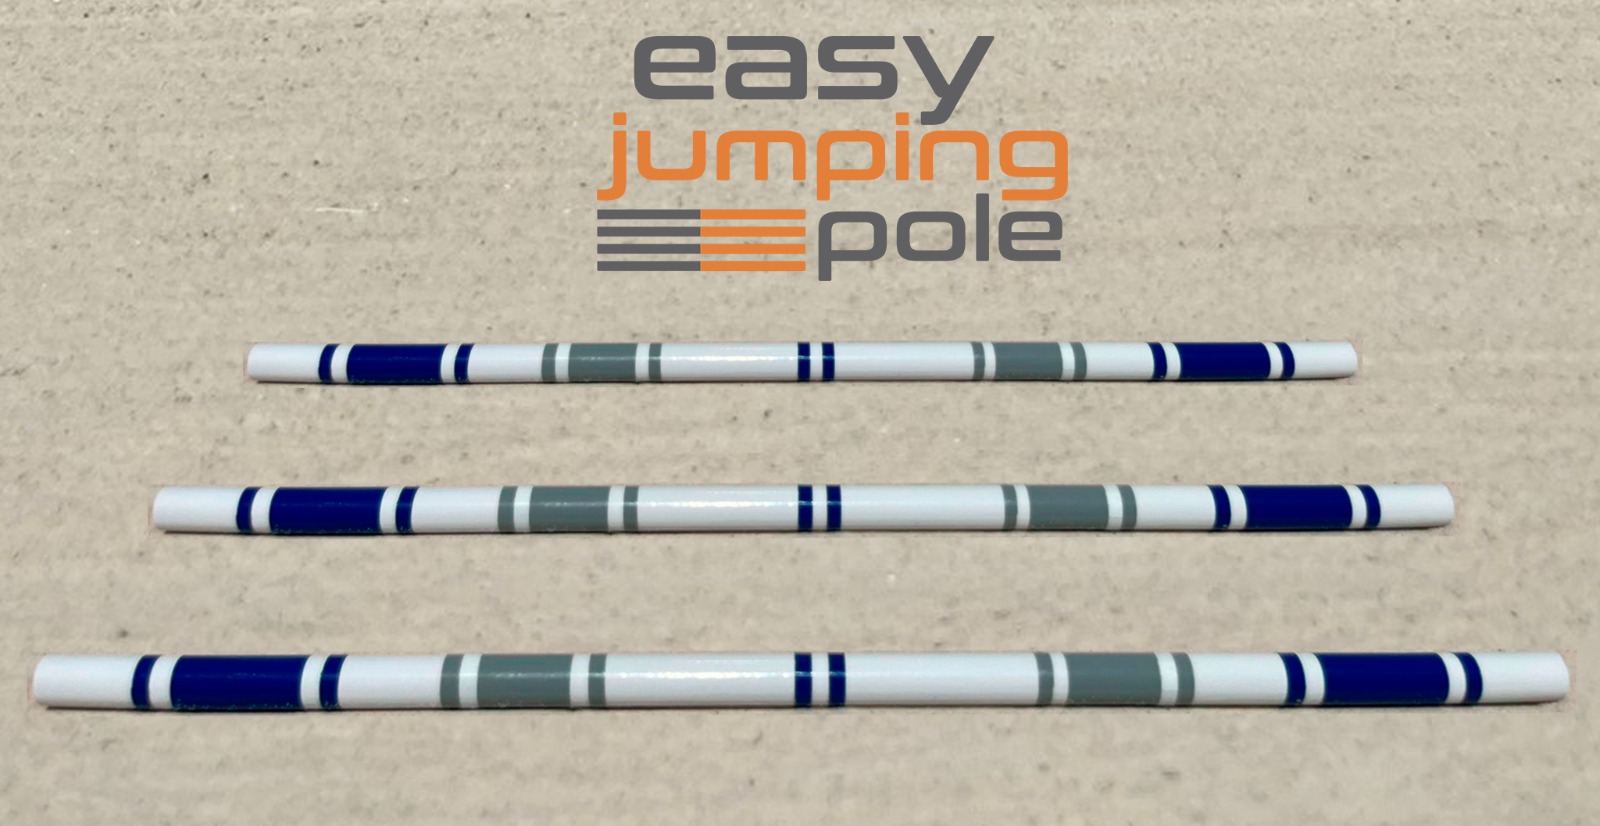 Easy jumping pole Model A-5